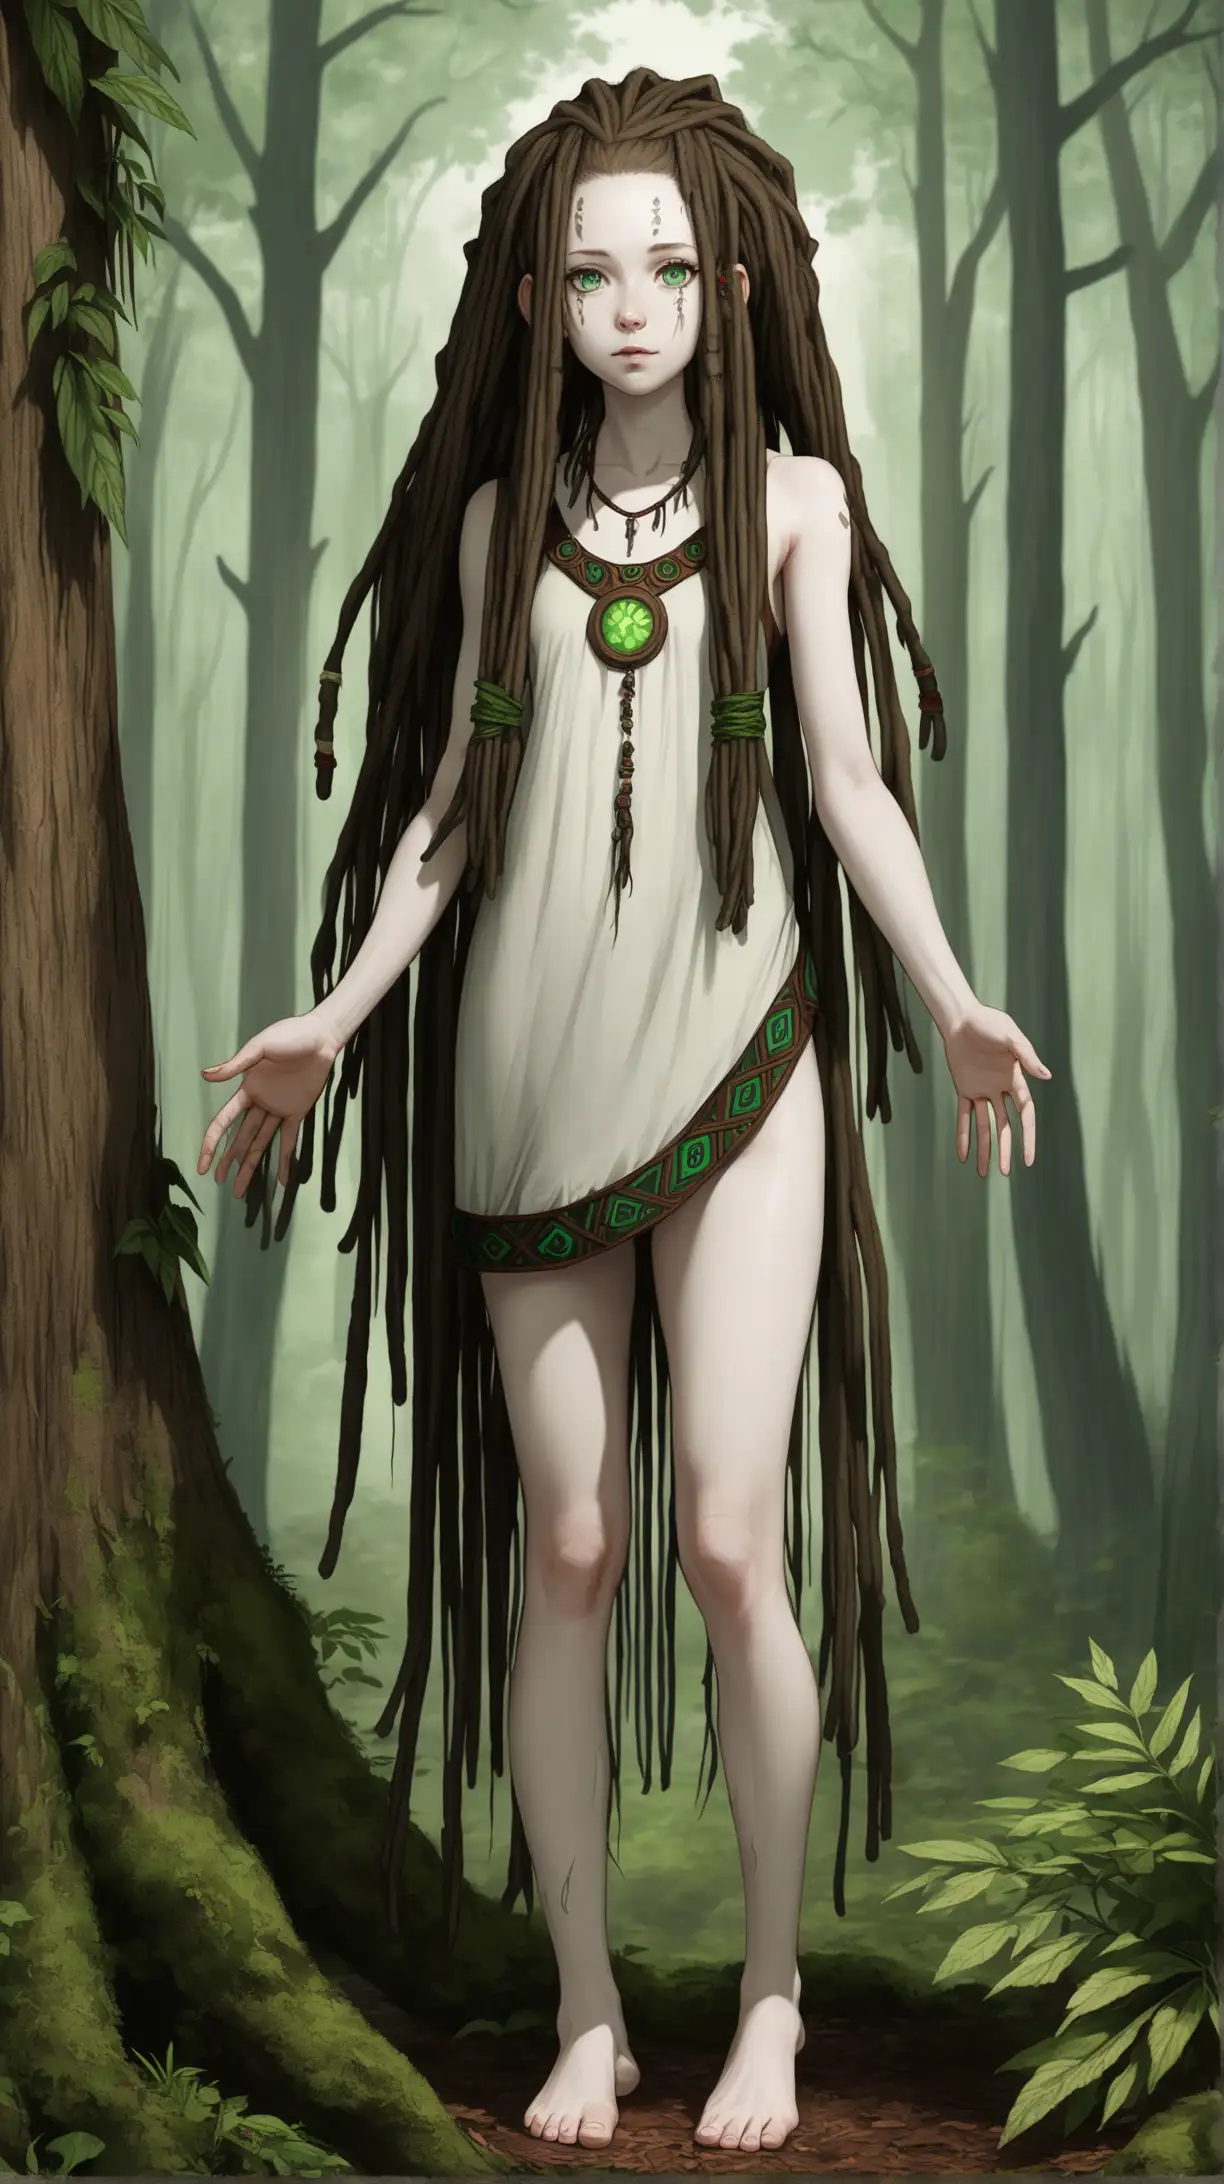 Young Druid Woman with Dreadlocks in a Forest